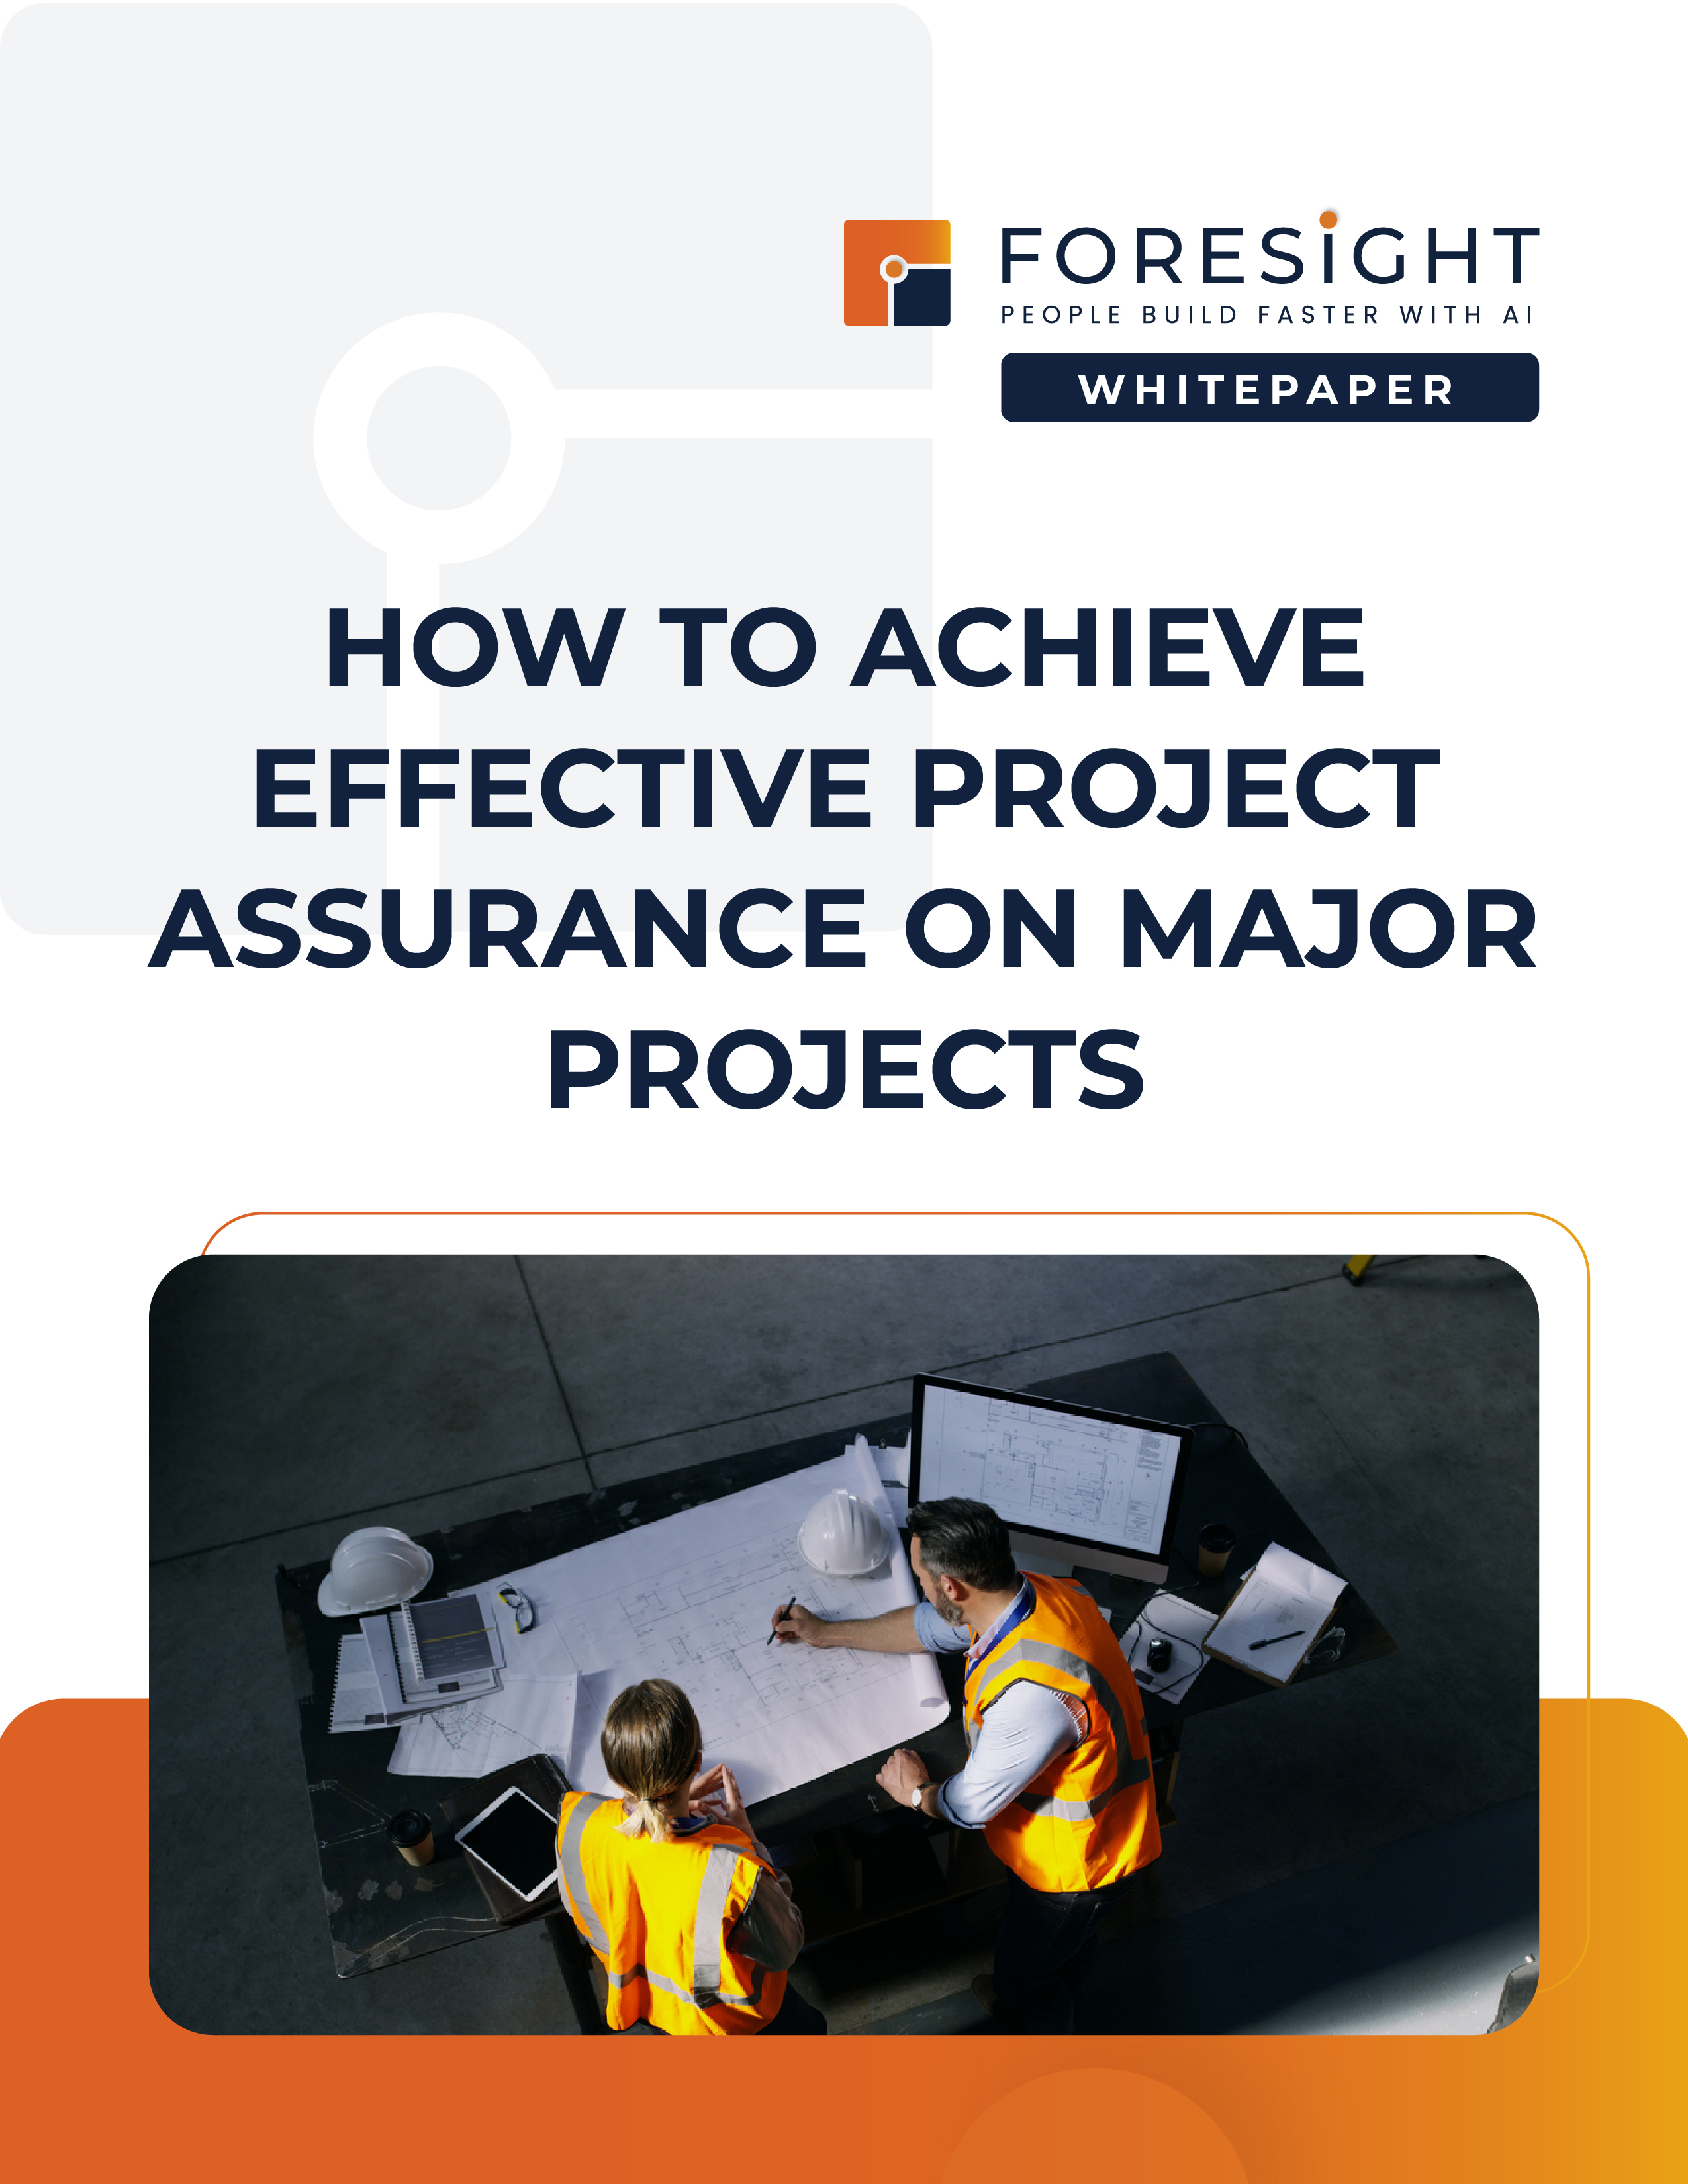 Achieving Effective Project Assurance on Major Projects